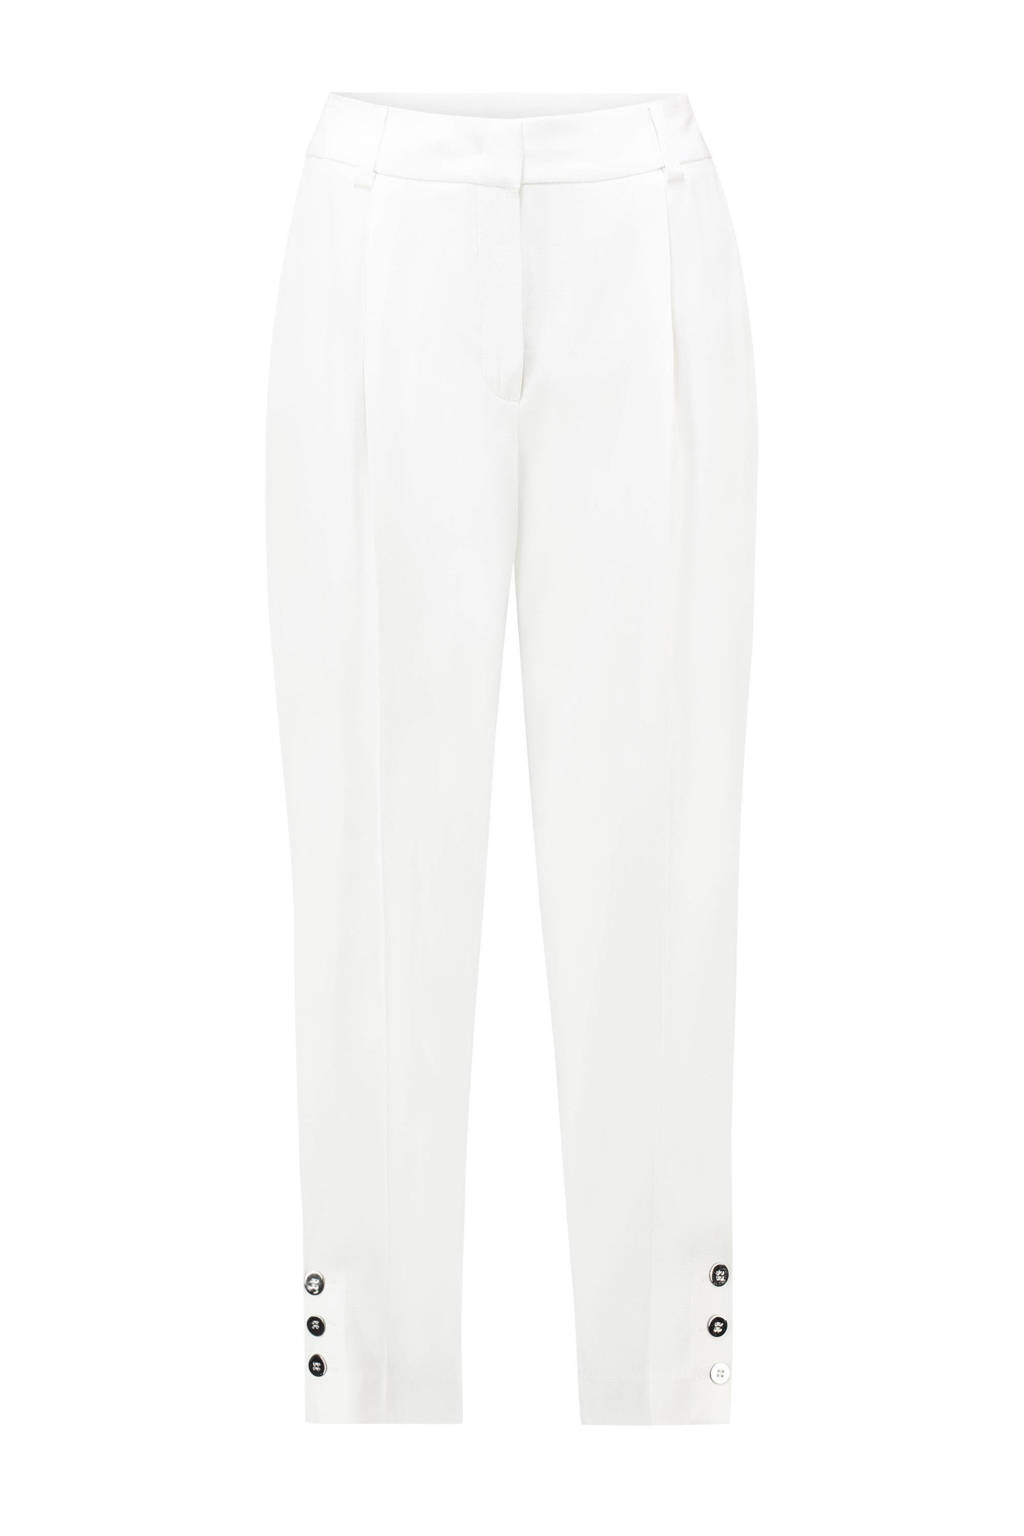 Claudia Sträter cropped high waist tapered fit pantalon wit